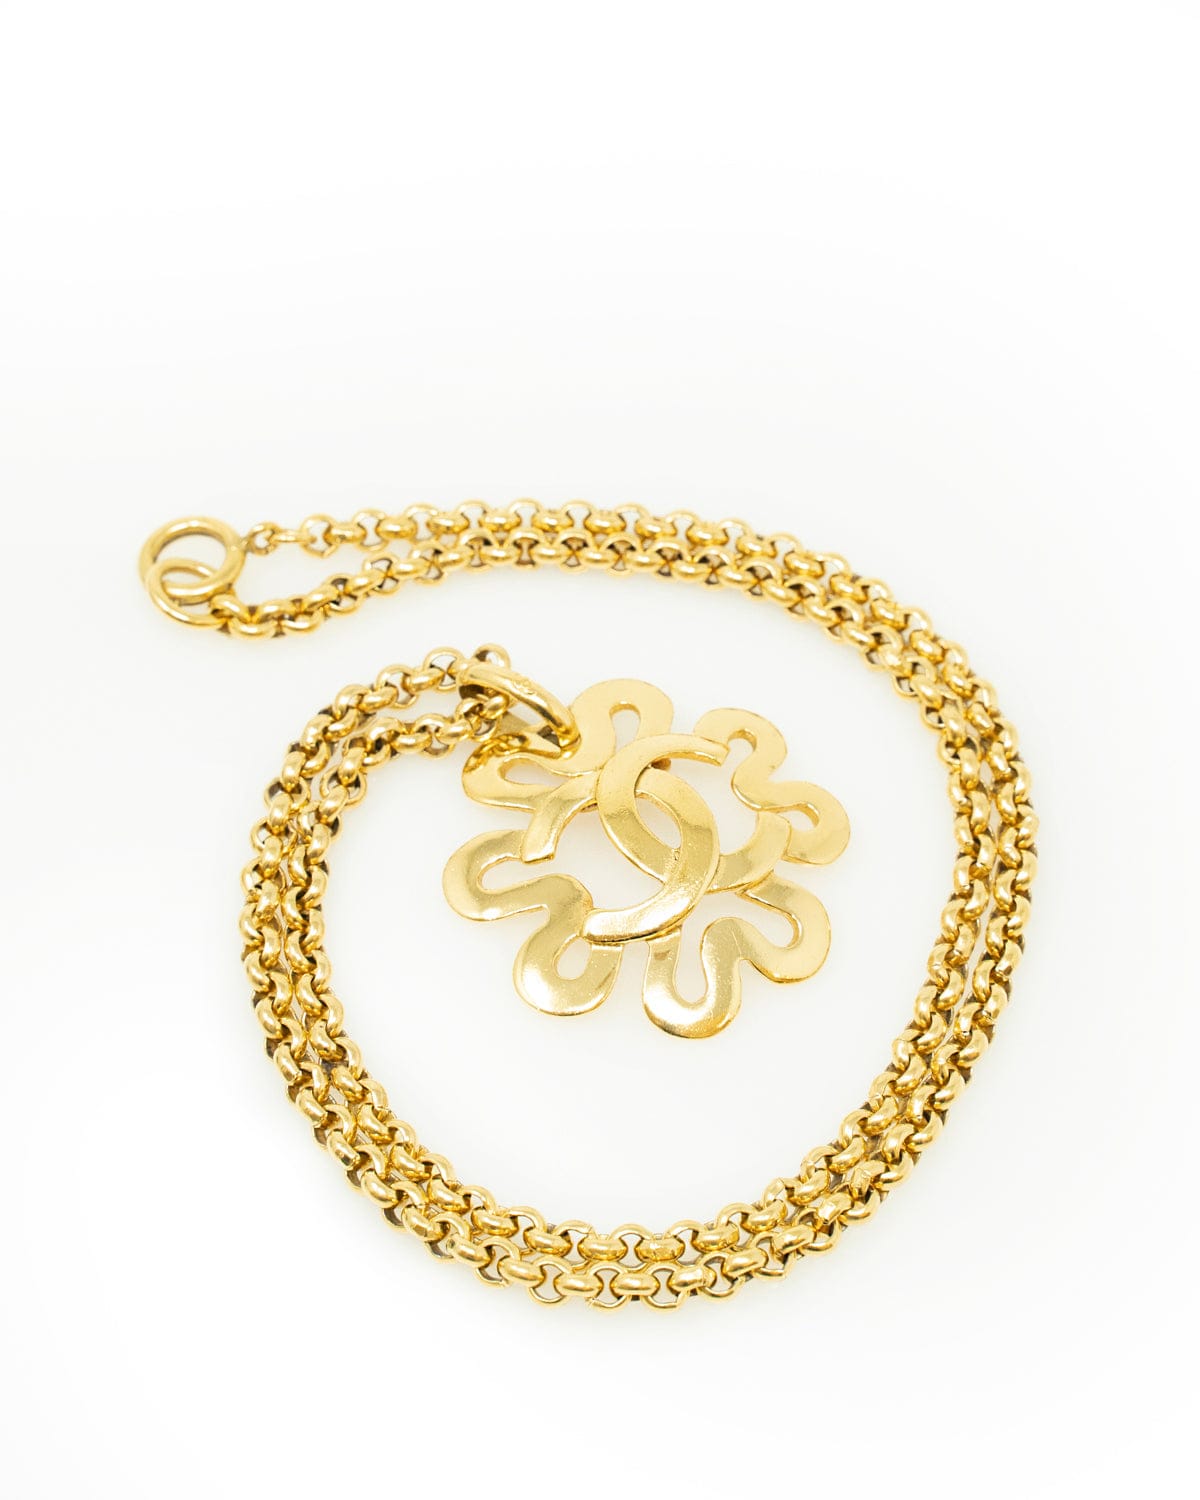 Chanel Vintage Chanel Gold Plated CC Clover Charm Pendant Necklace - ASL2403